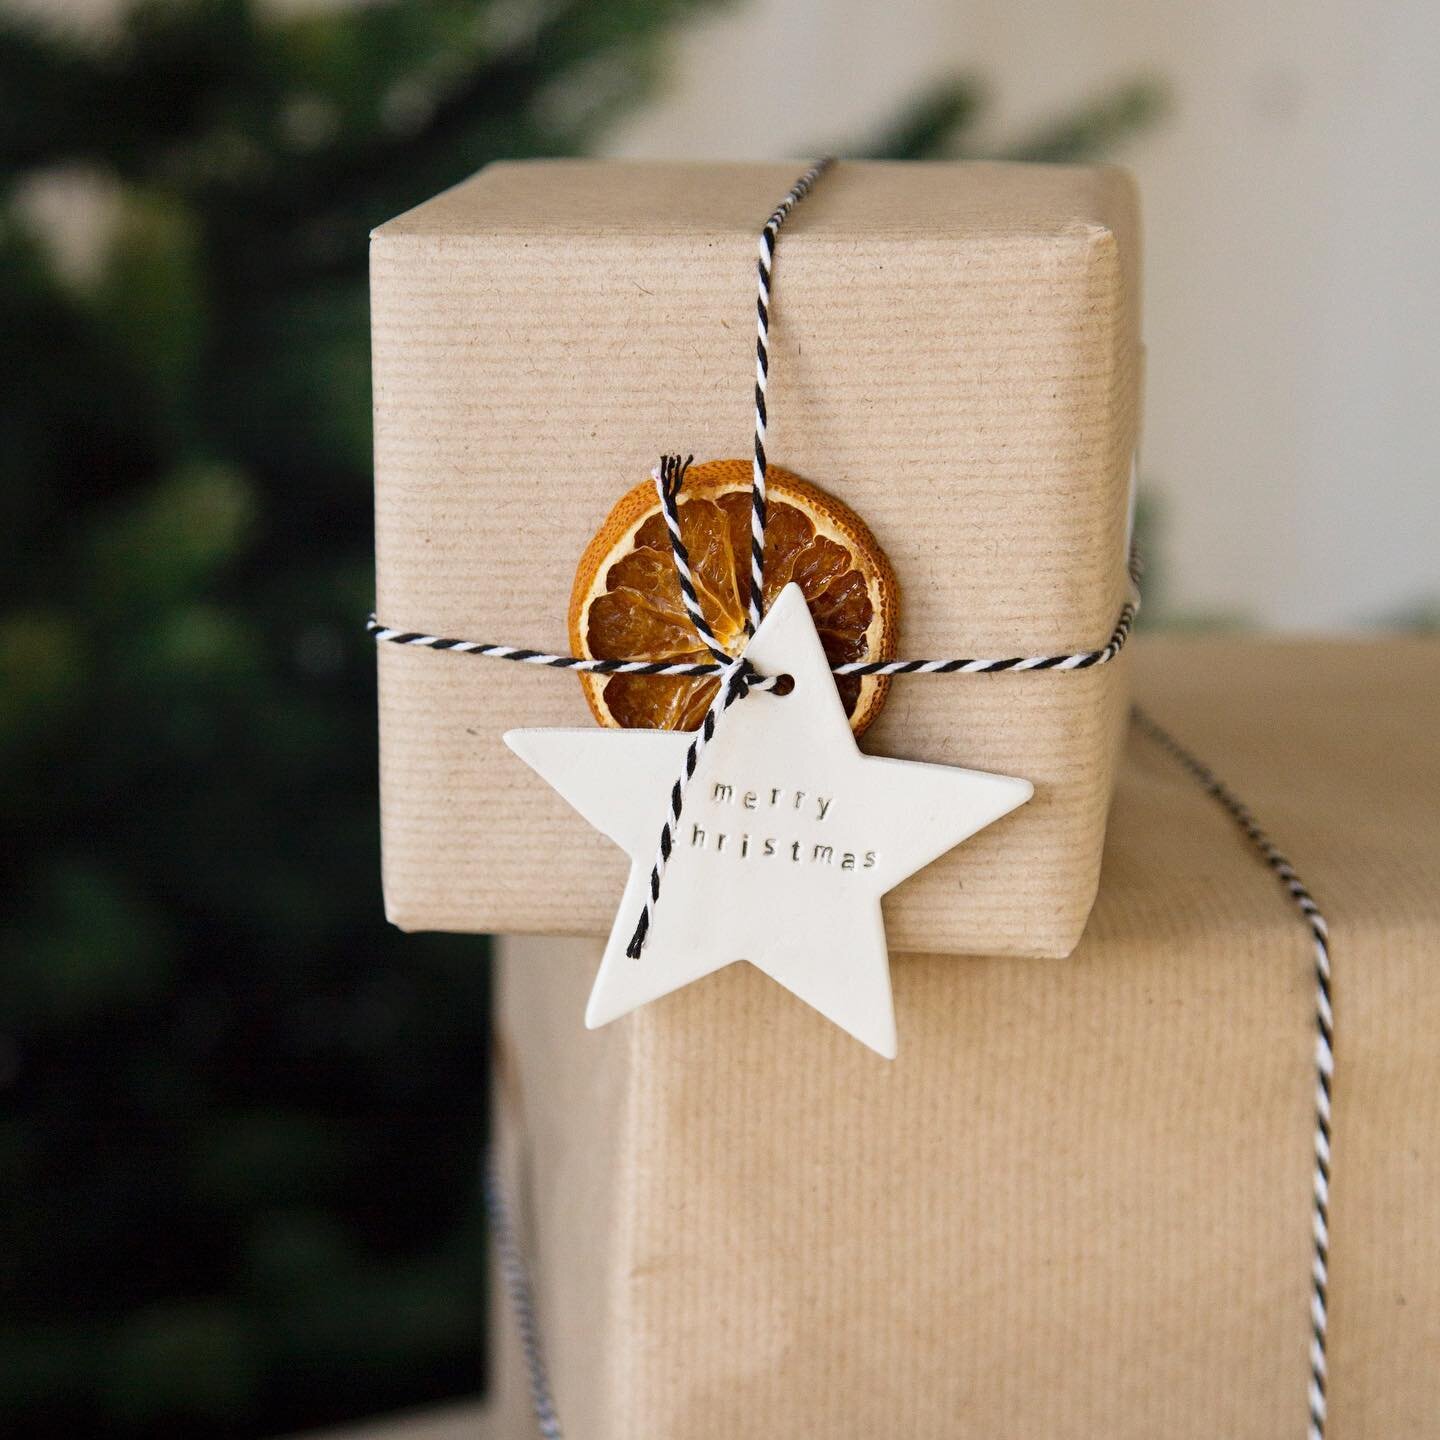 Simple bit effective. Can&rsquo;t beat a star at Christmas&hellip;. Ohh an an orange&hellip; and maybe some mulled wine.

These stars can be used as decorations or gift tags. 
.
.
.
.
.

#christmasdecor #christmas #sustainablechristmas #scandihome #s